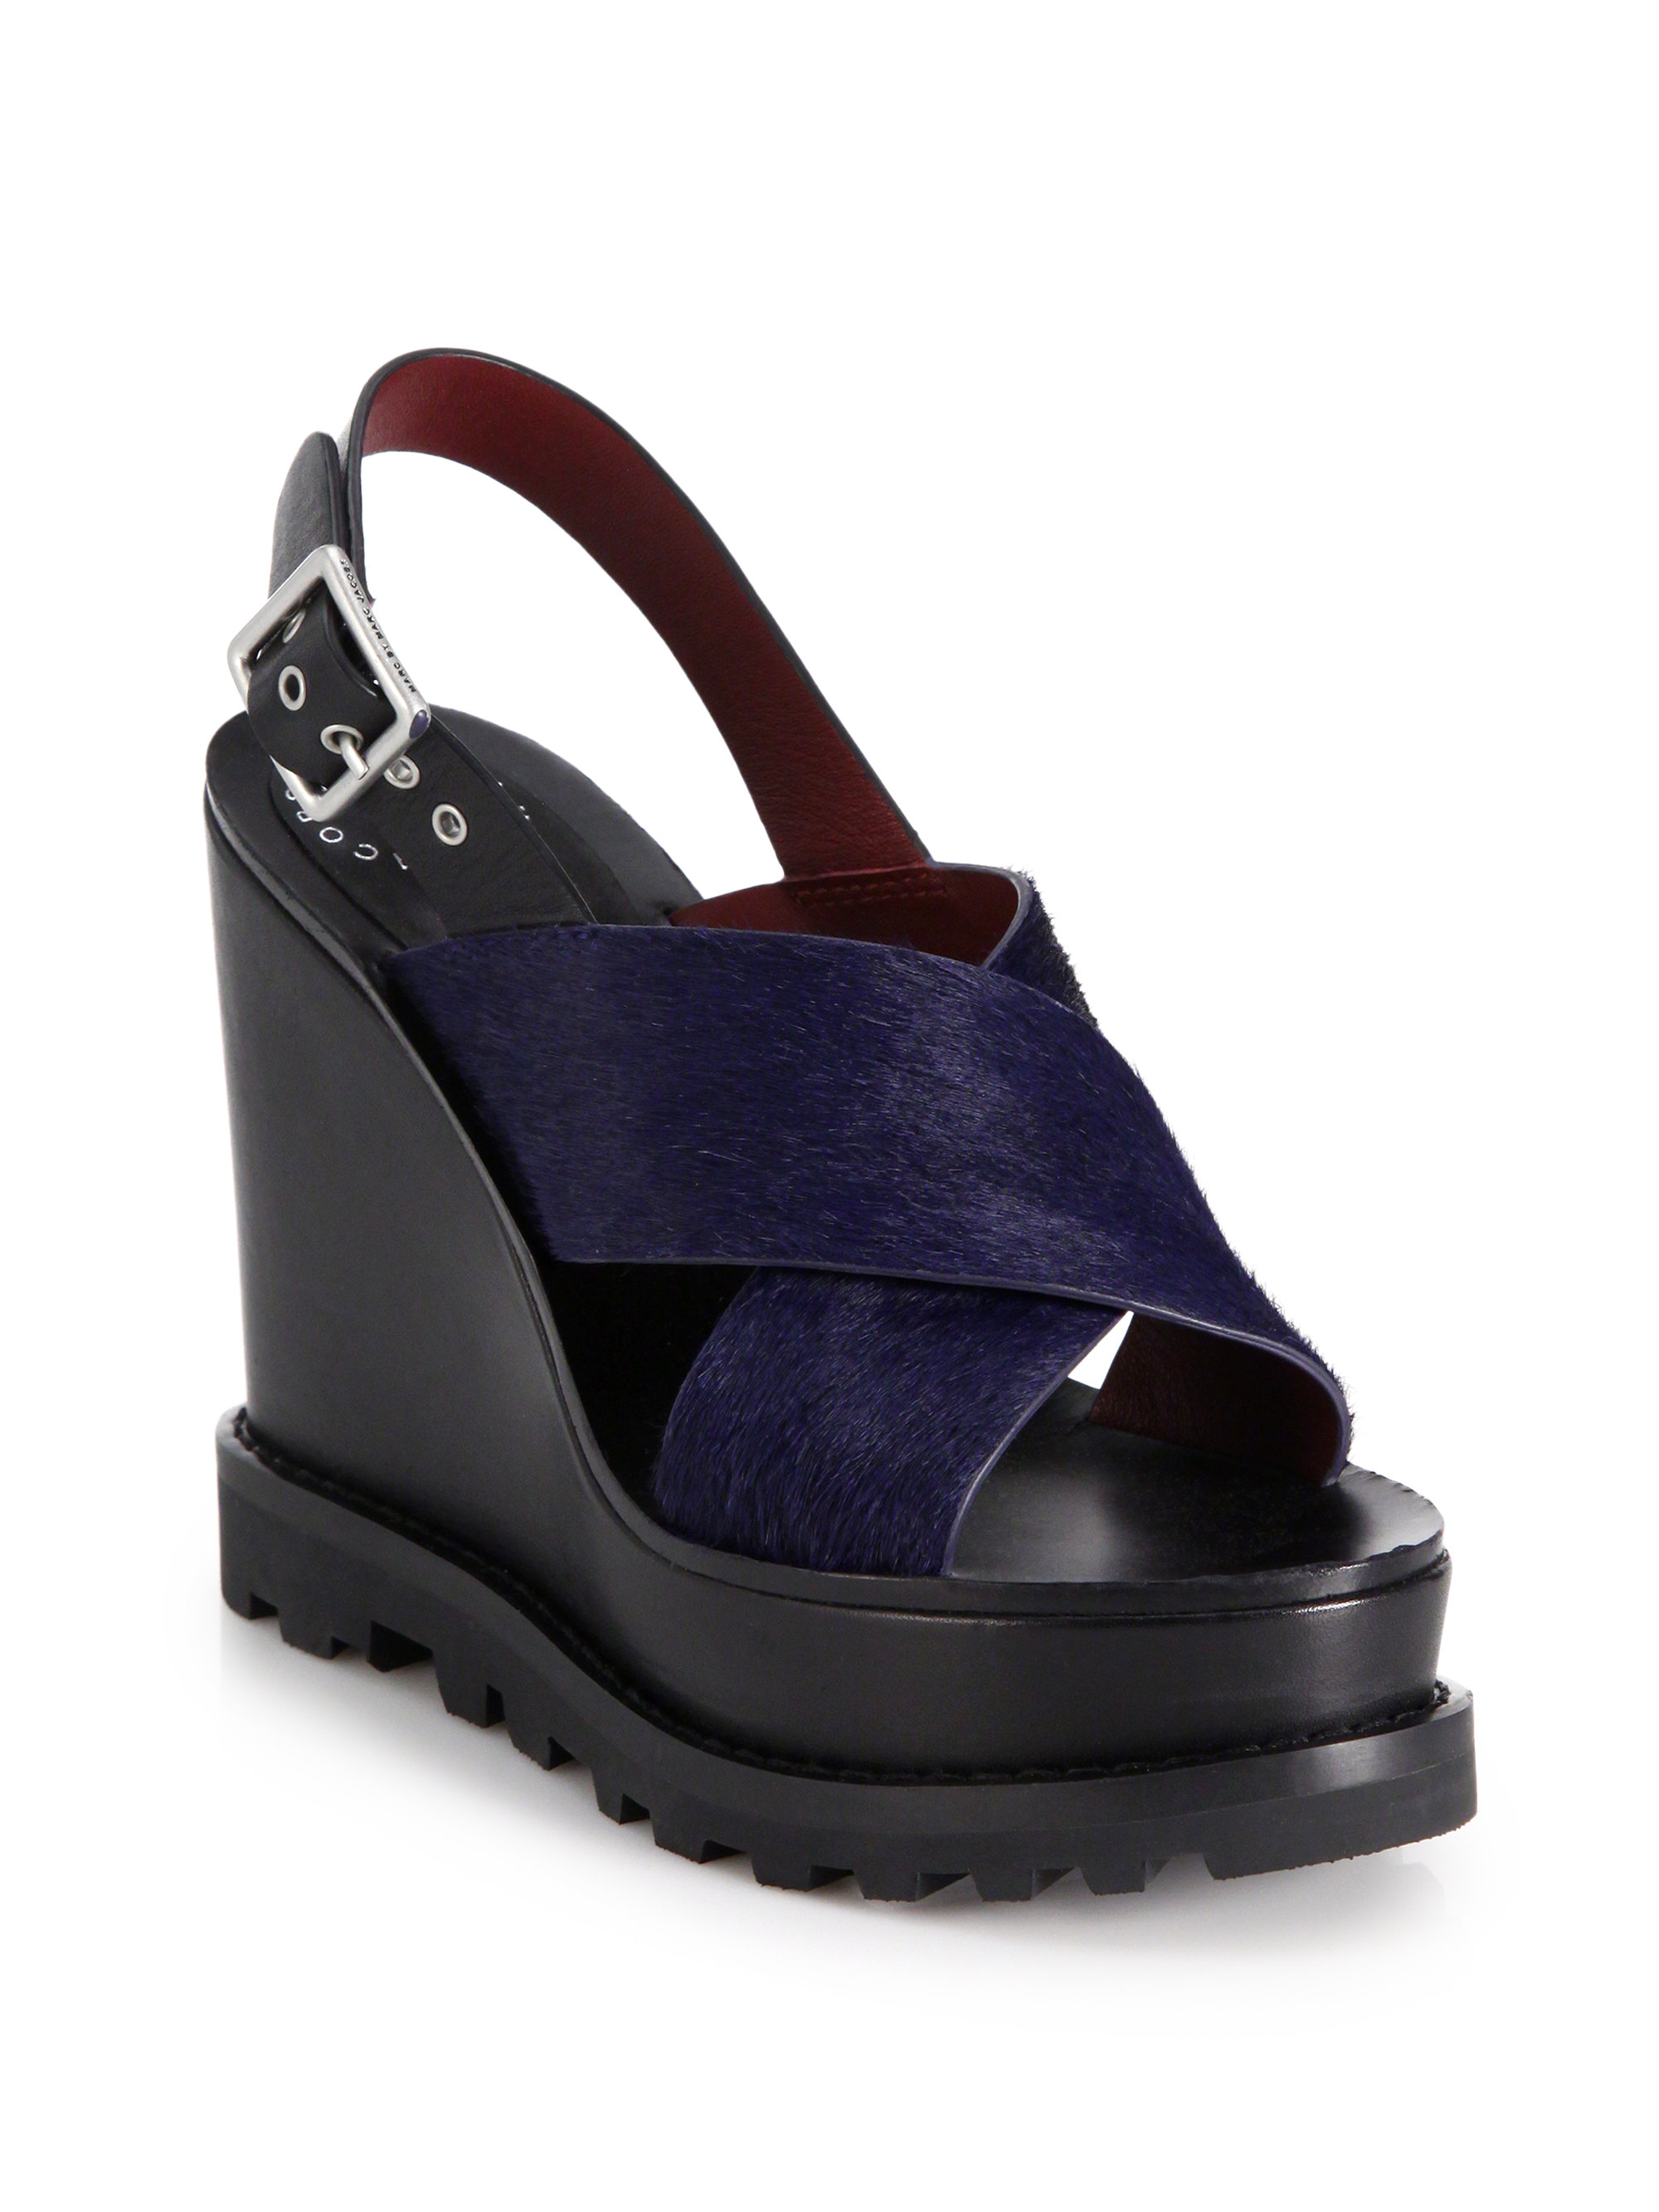 marc jacobs wedges